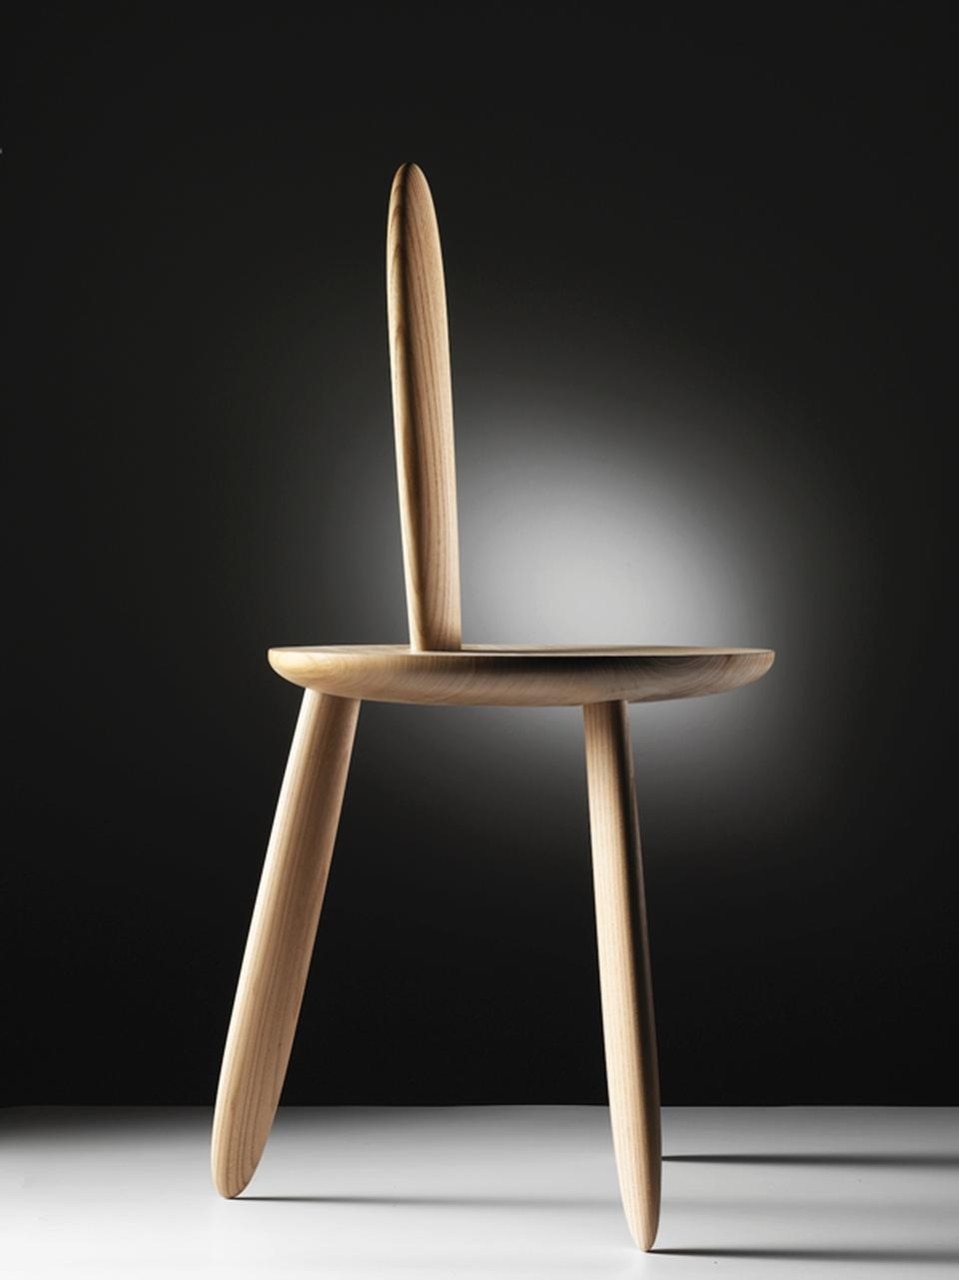 3DWN1UP chair by Aldo Bakker in elm wood. Production: Kuperus and Gardenier. Distribution: Particles Gallery. Photo: Erik and Petra Hesmerg.
